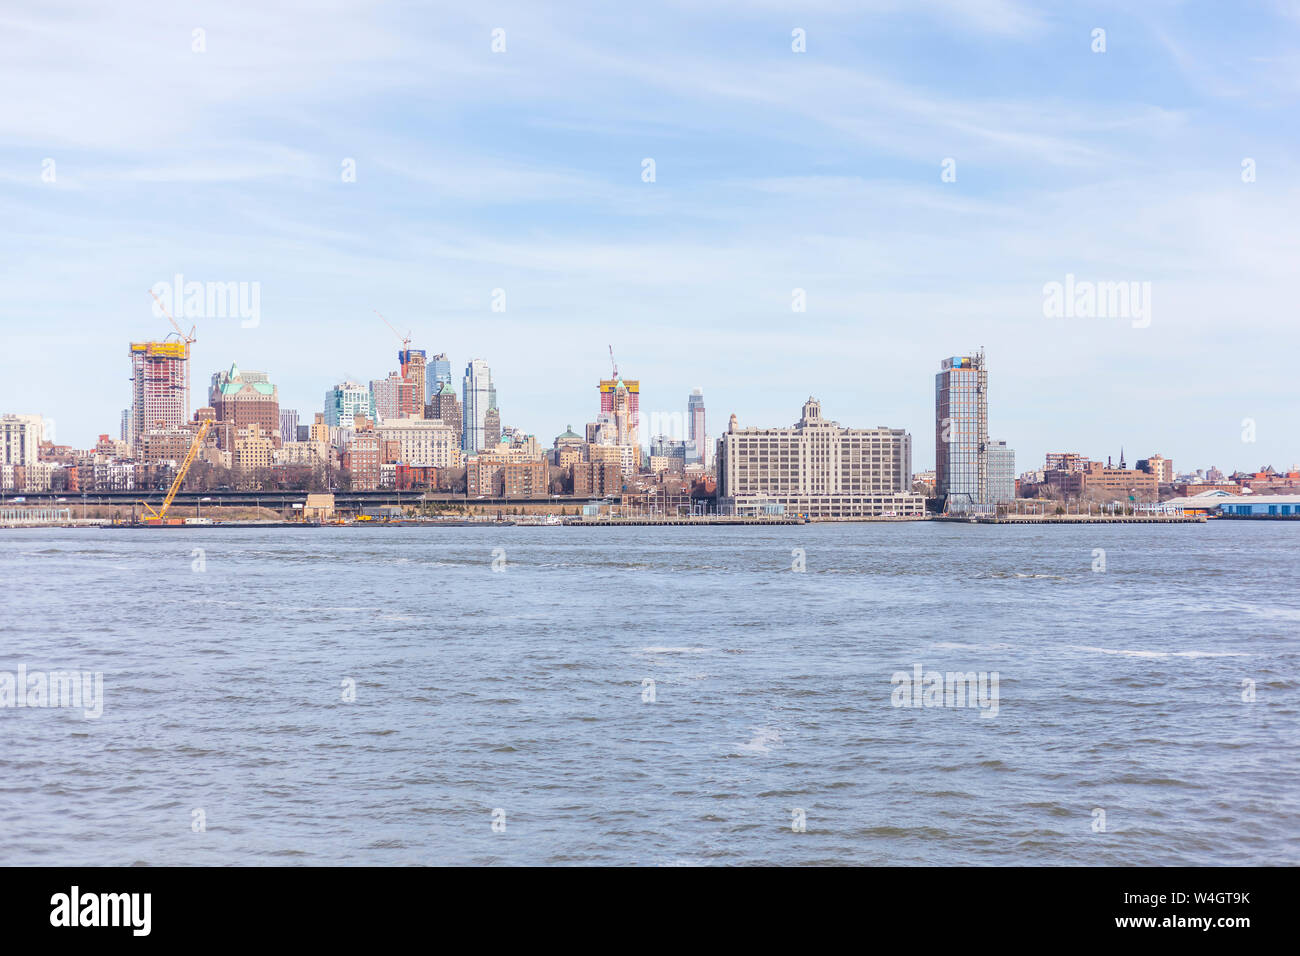 Skyline at the waterfront seen from Upper New York Bay, Manhattan, New York City, USA Stock Photo